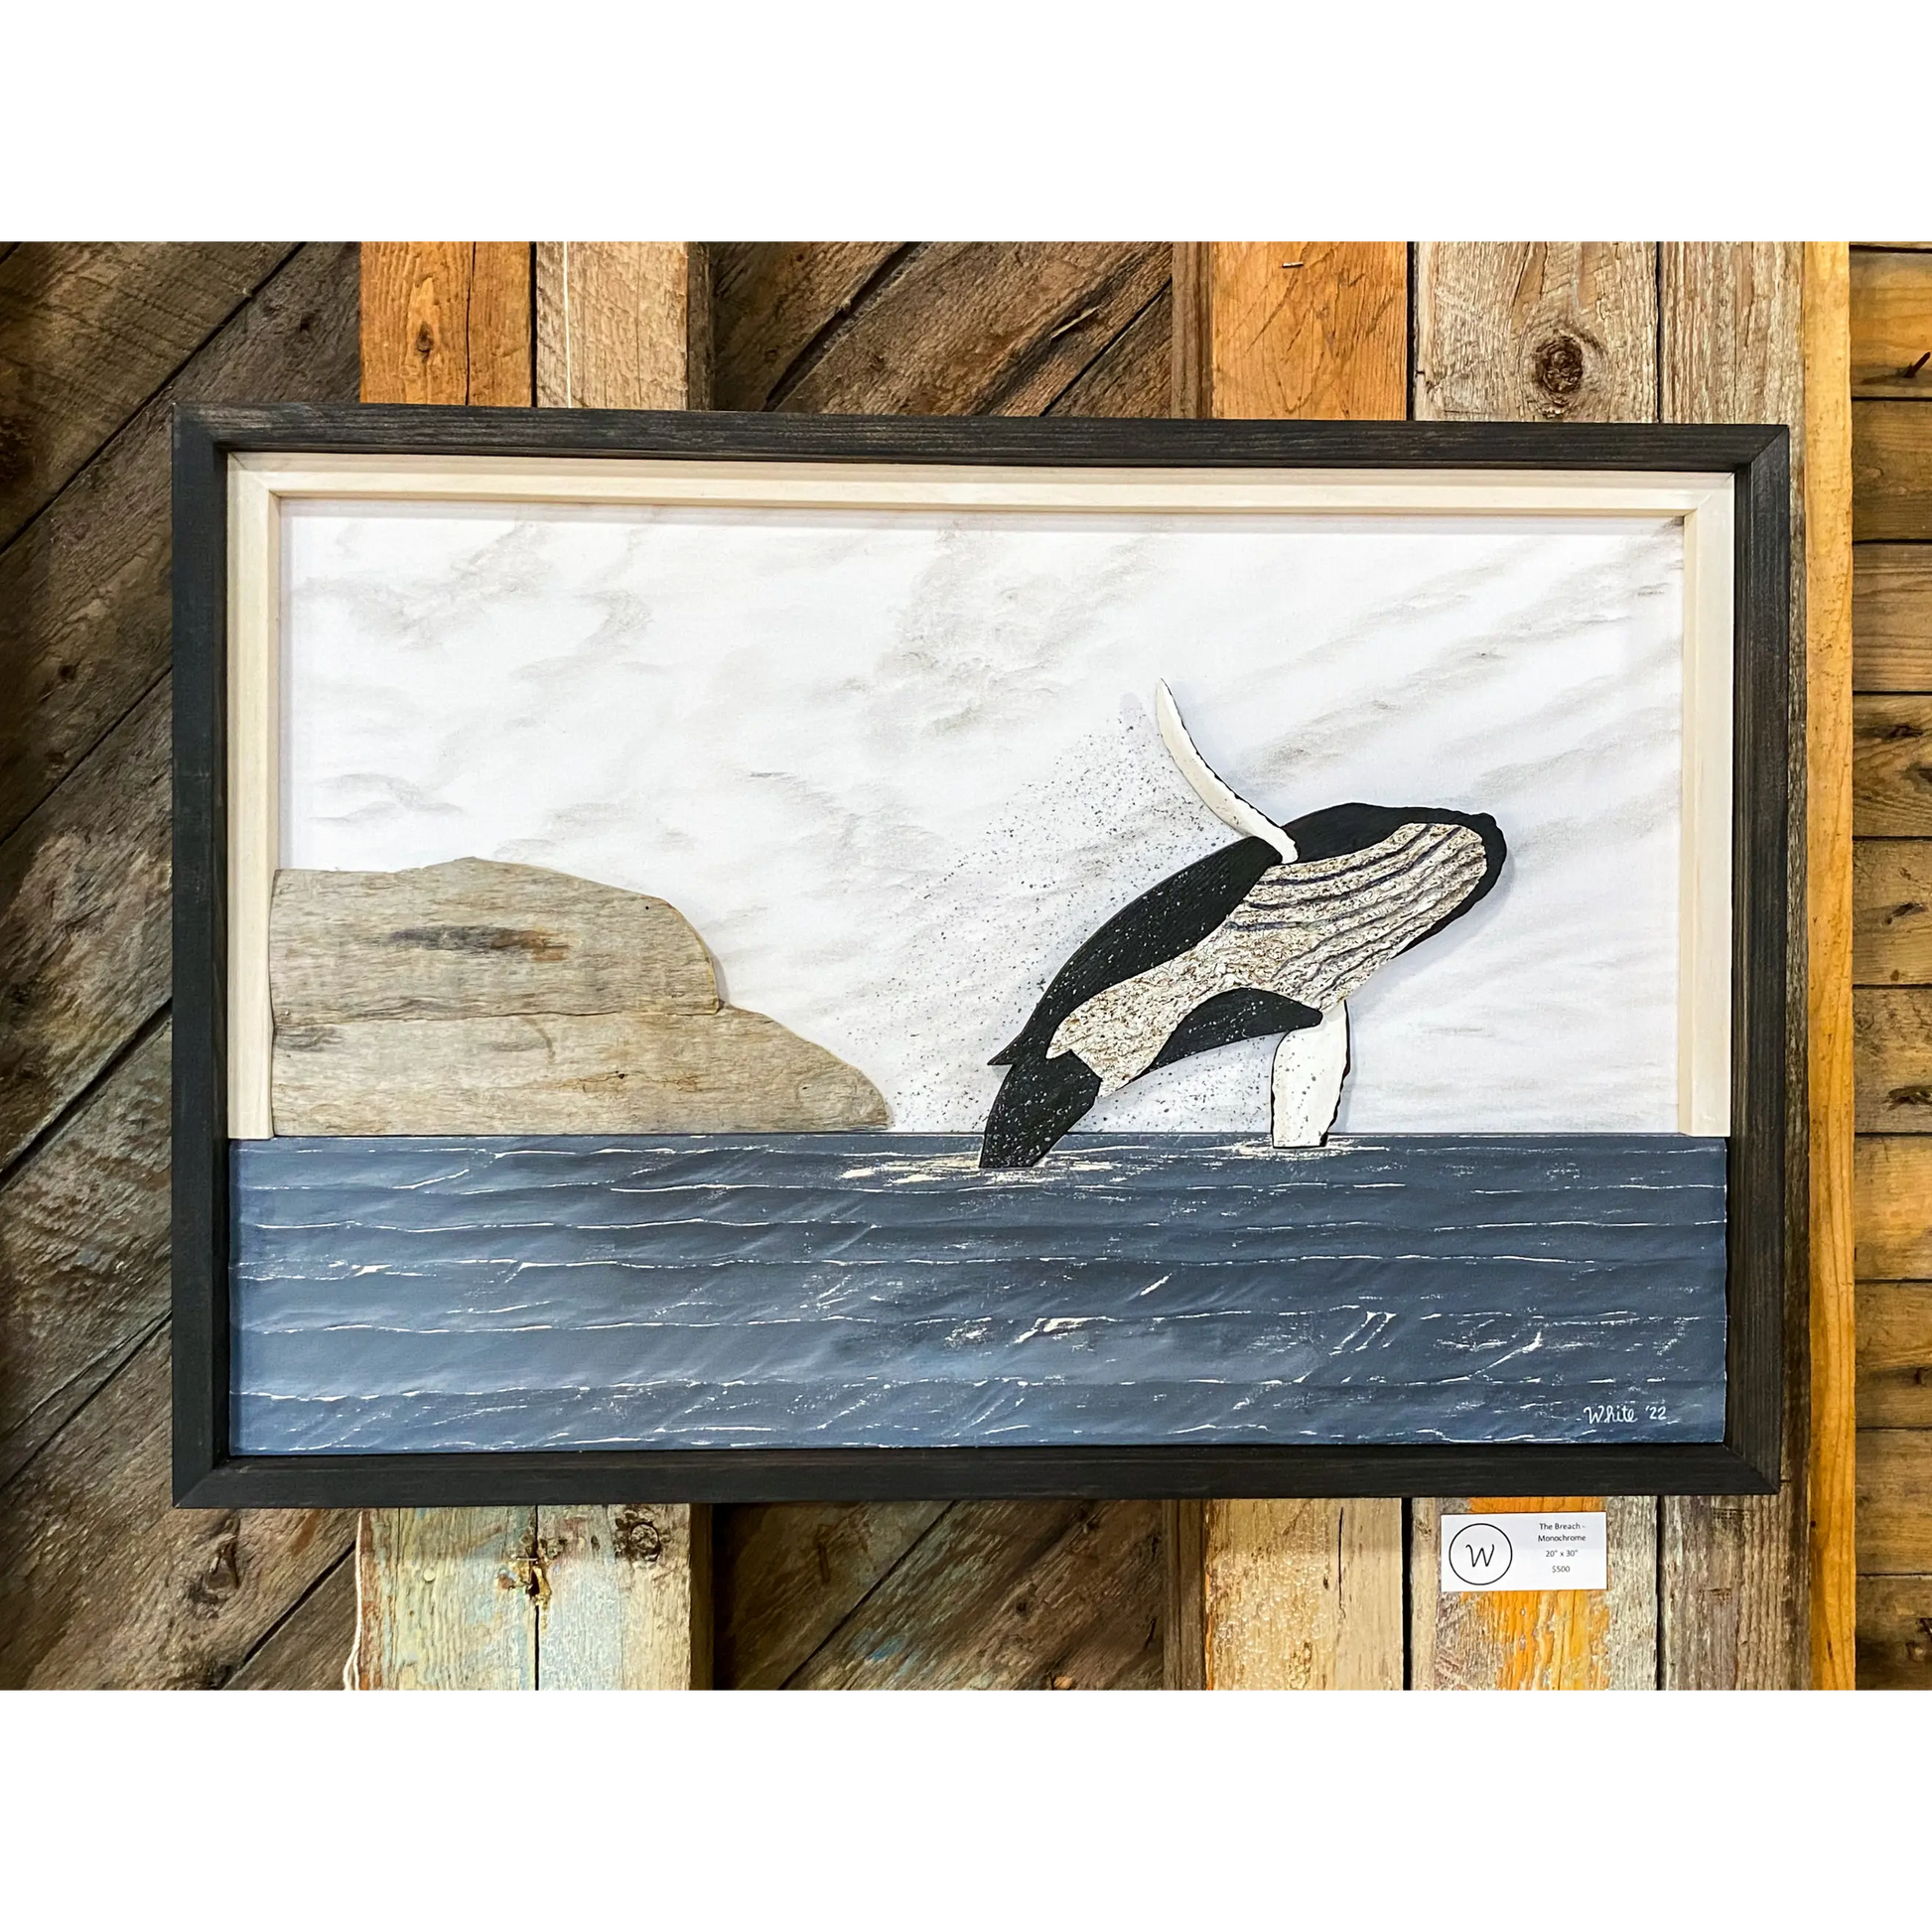 "The Breach- Water Street Series" is a mixed-media artwork of a whale breaching out of the water done in a monochrome scheme.